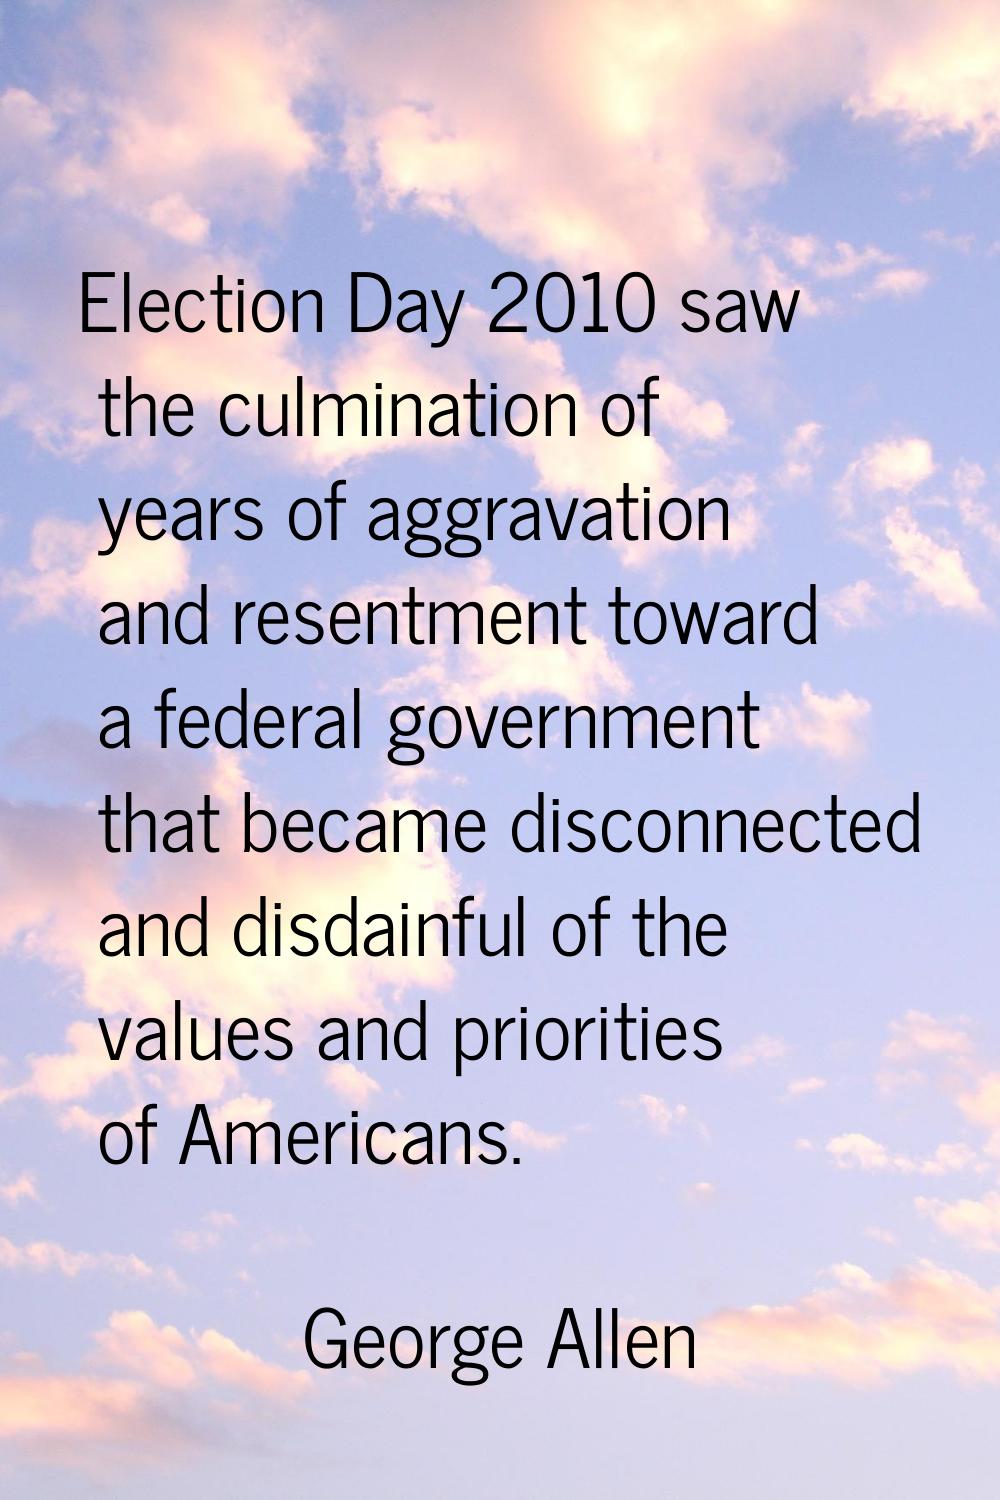 Election Day 2010 saw the culmination of years of aggravation and resentment toward a federal gover